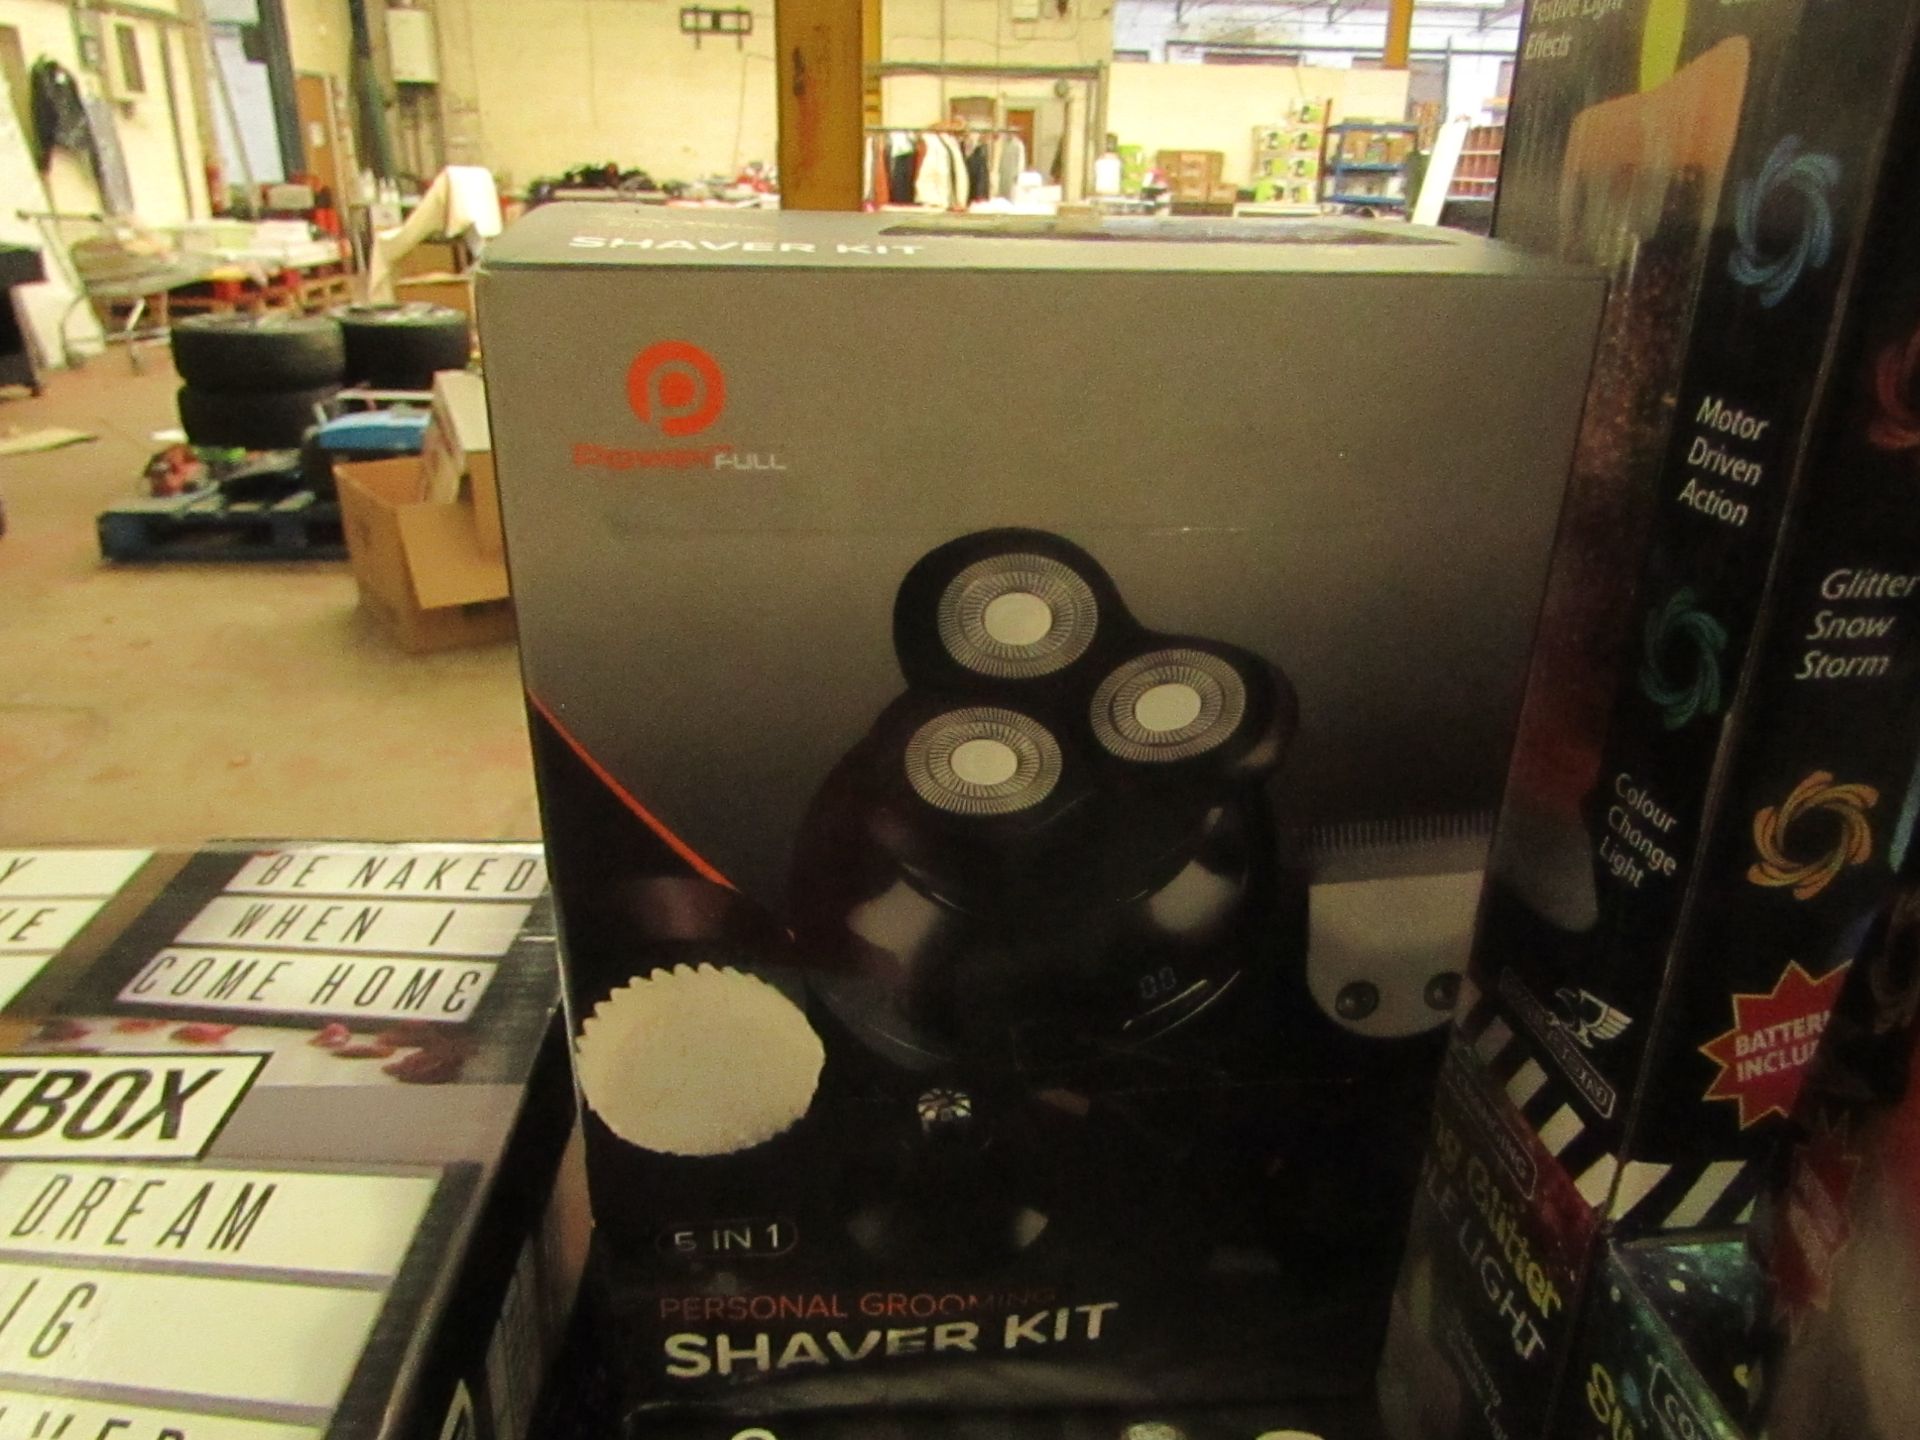 Power full 5 in 1 shaver kit, unchecked and boxed